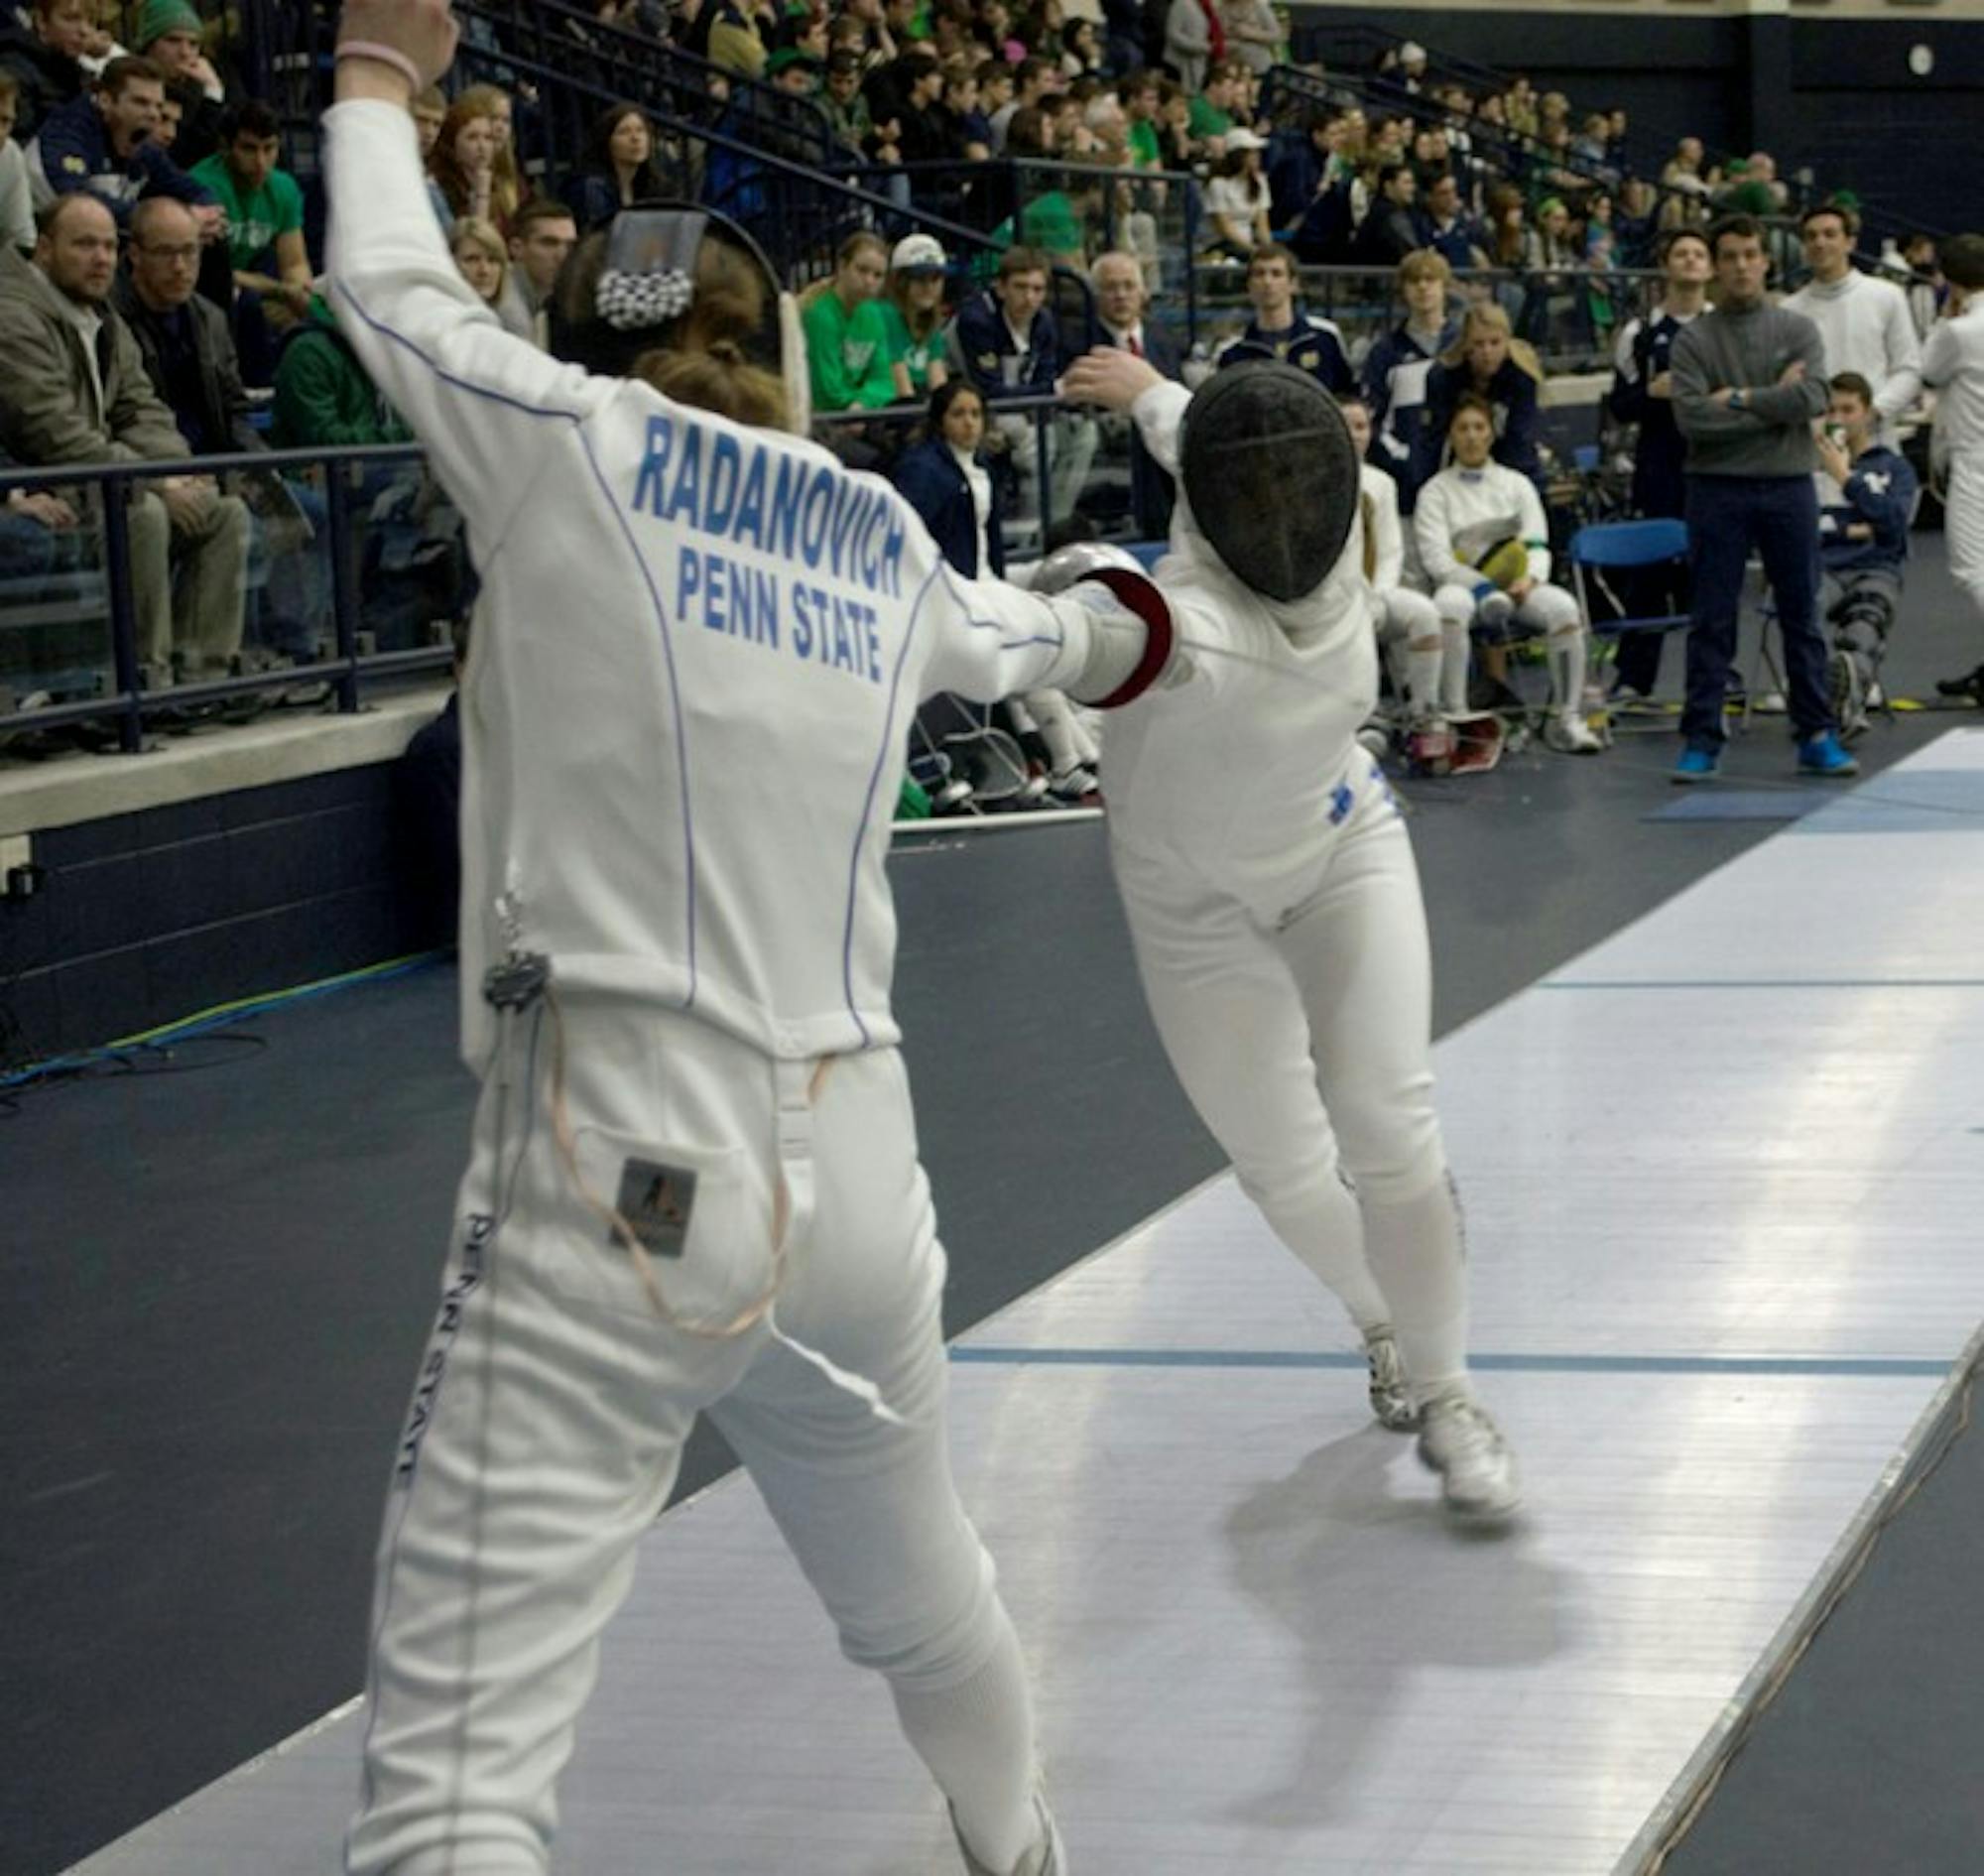 Irish sophomore fencer Lee Kiefer, right, competes during the DiCicco Duals at the Castellan Family Fencing Center on Feb. 8.